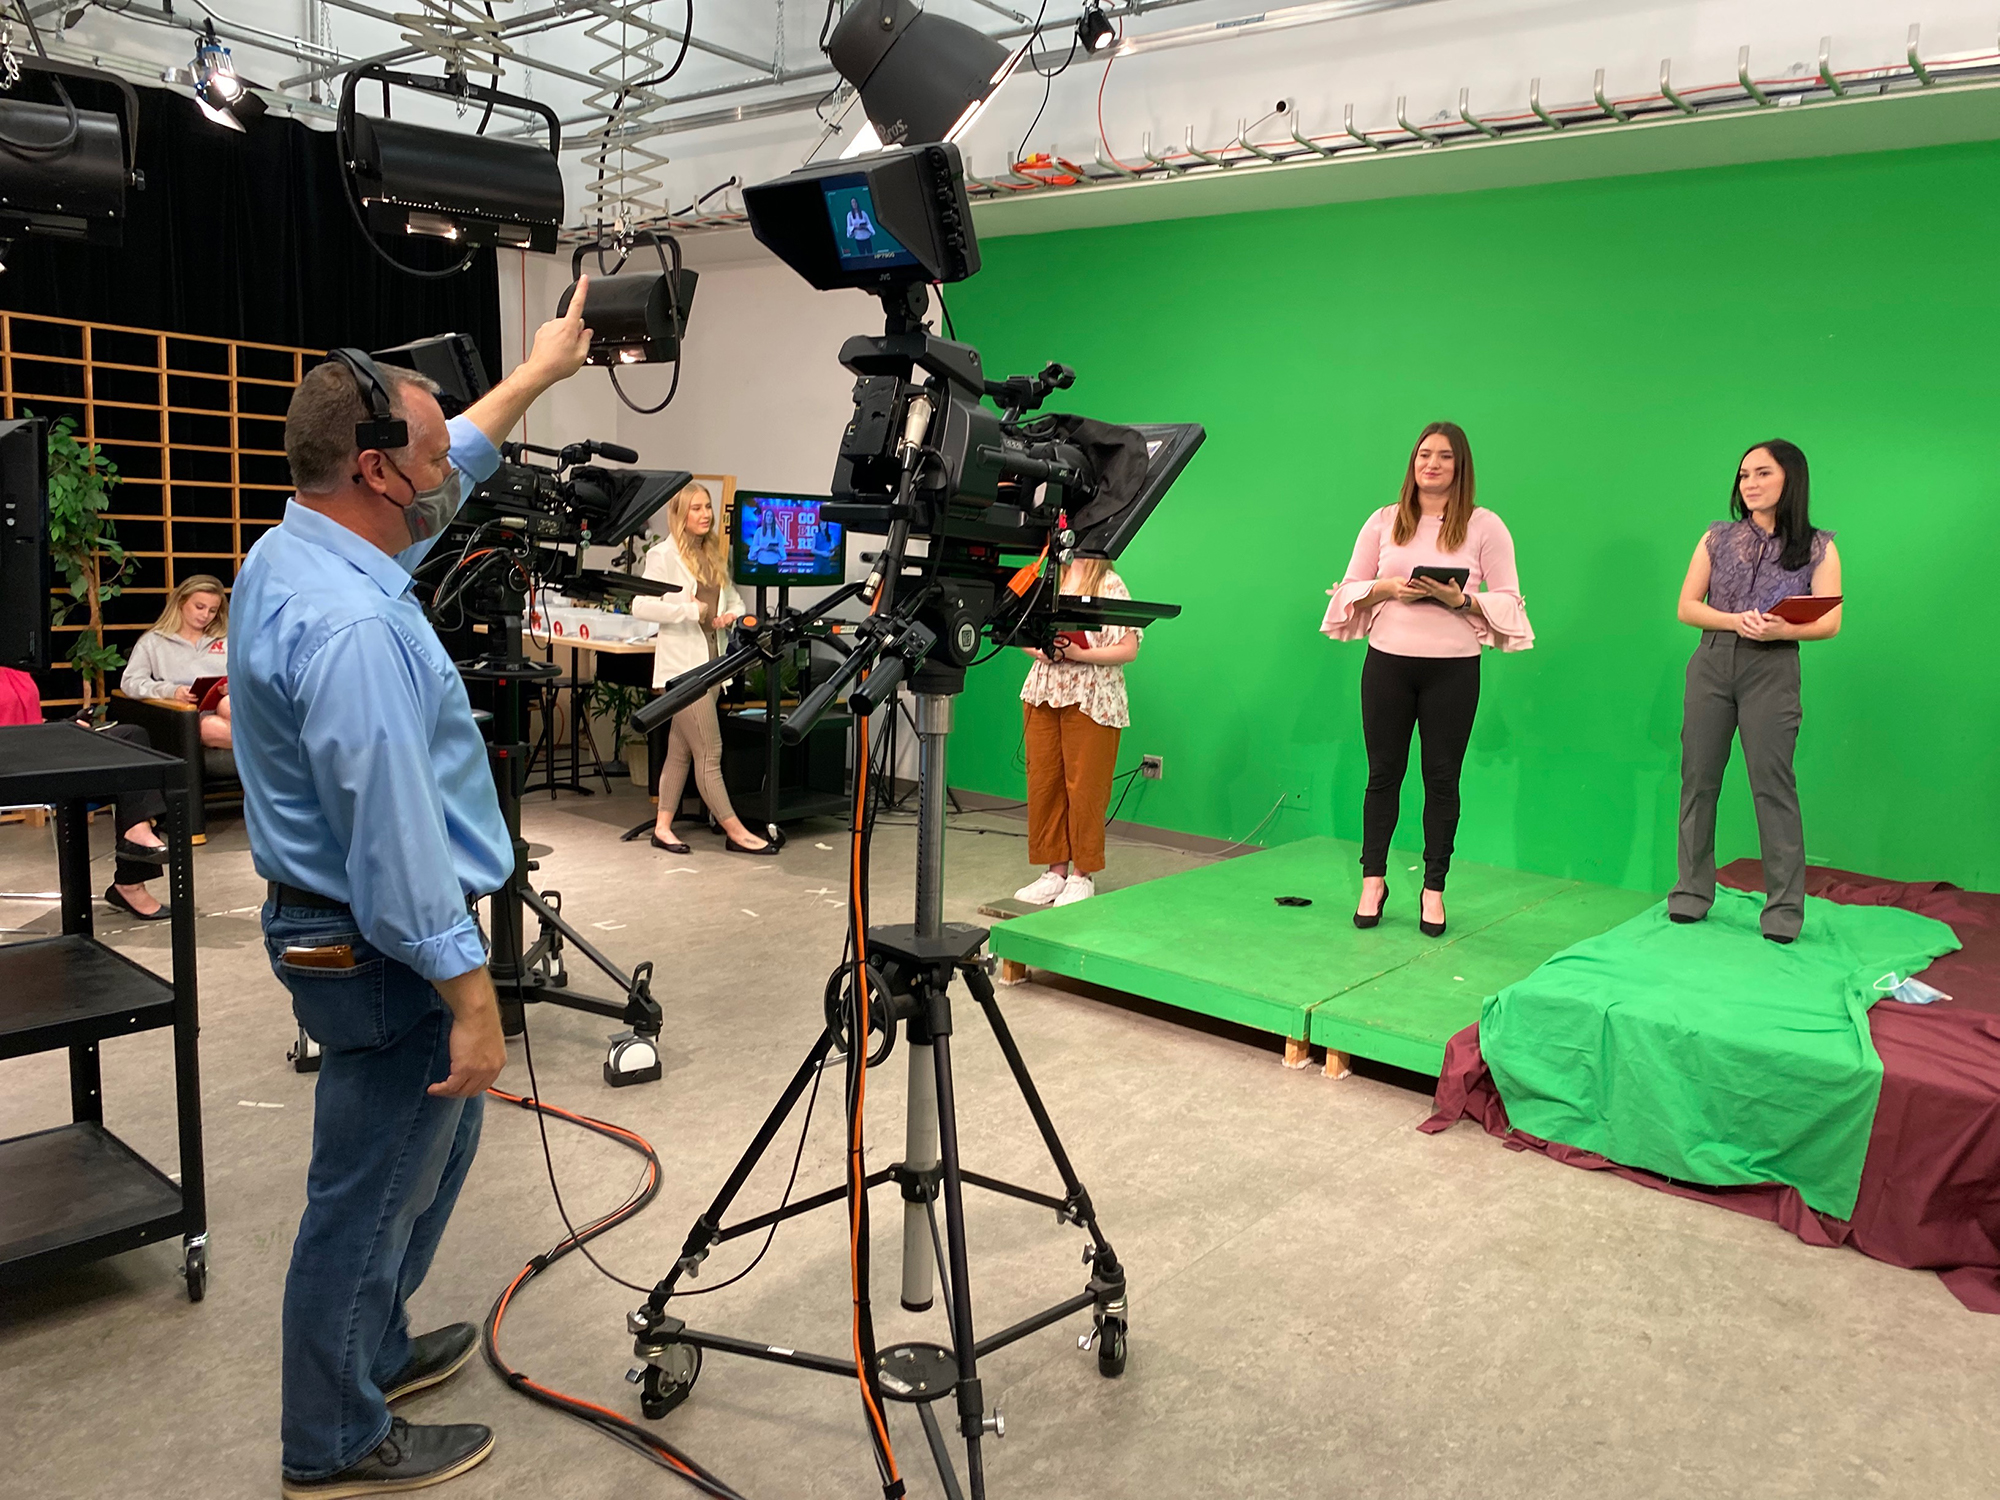 Anchors Kloee Sander, left, and Hallie Gutzwiller prepare for the Nebraska Nightly show open. Faculty liaison Brian Petrotta provides a countdown. [photo: College of Journalism & Mass Communications | University of Nebraska-Lincoln]